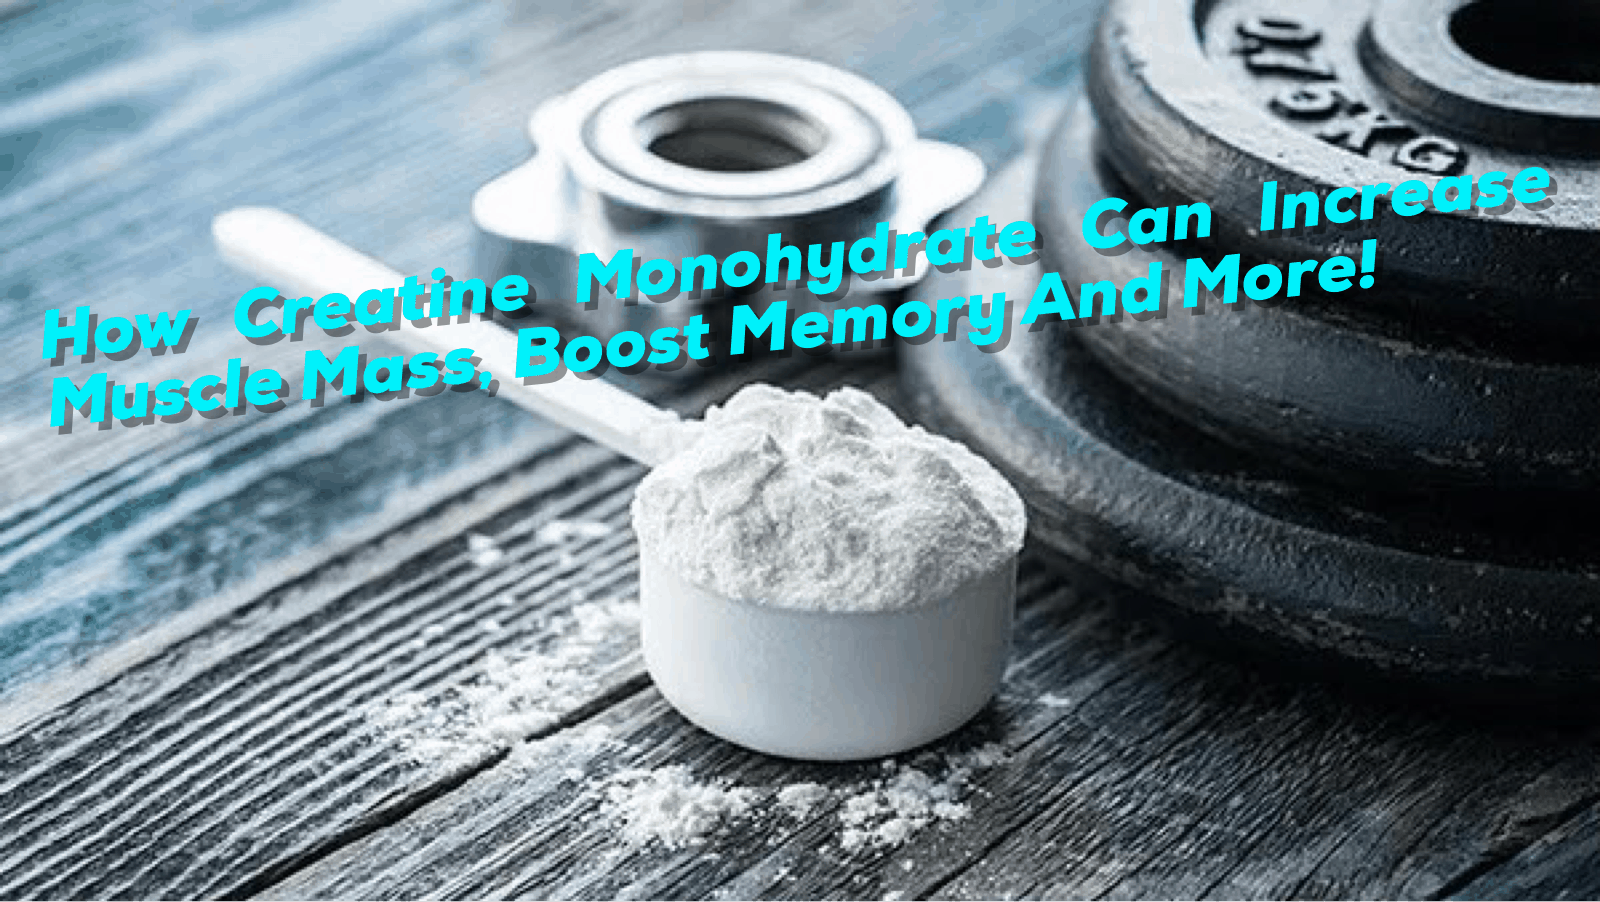 You are currently viewing Creatine Can Increase Muscle Mass, Boost Memory And More!